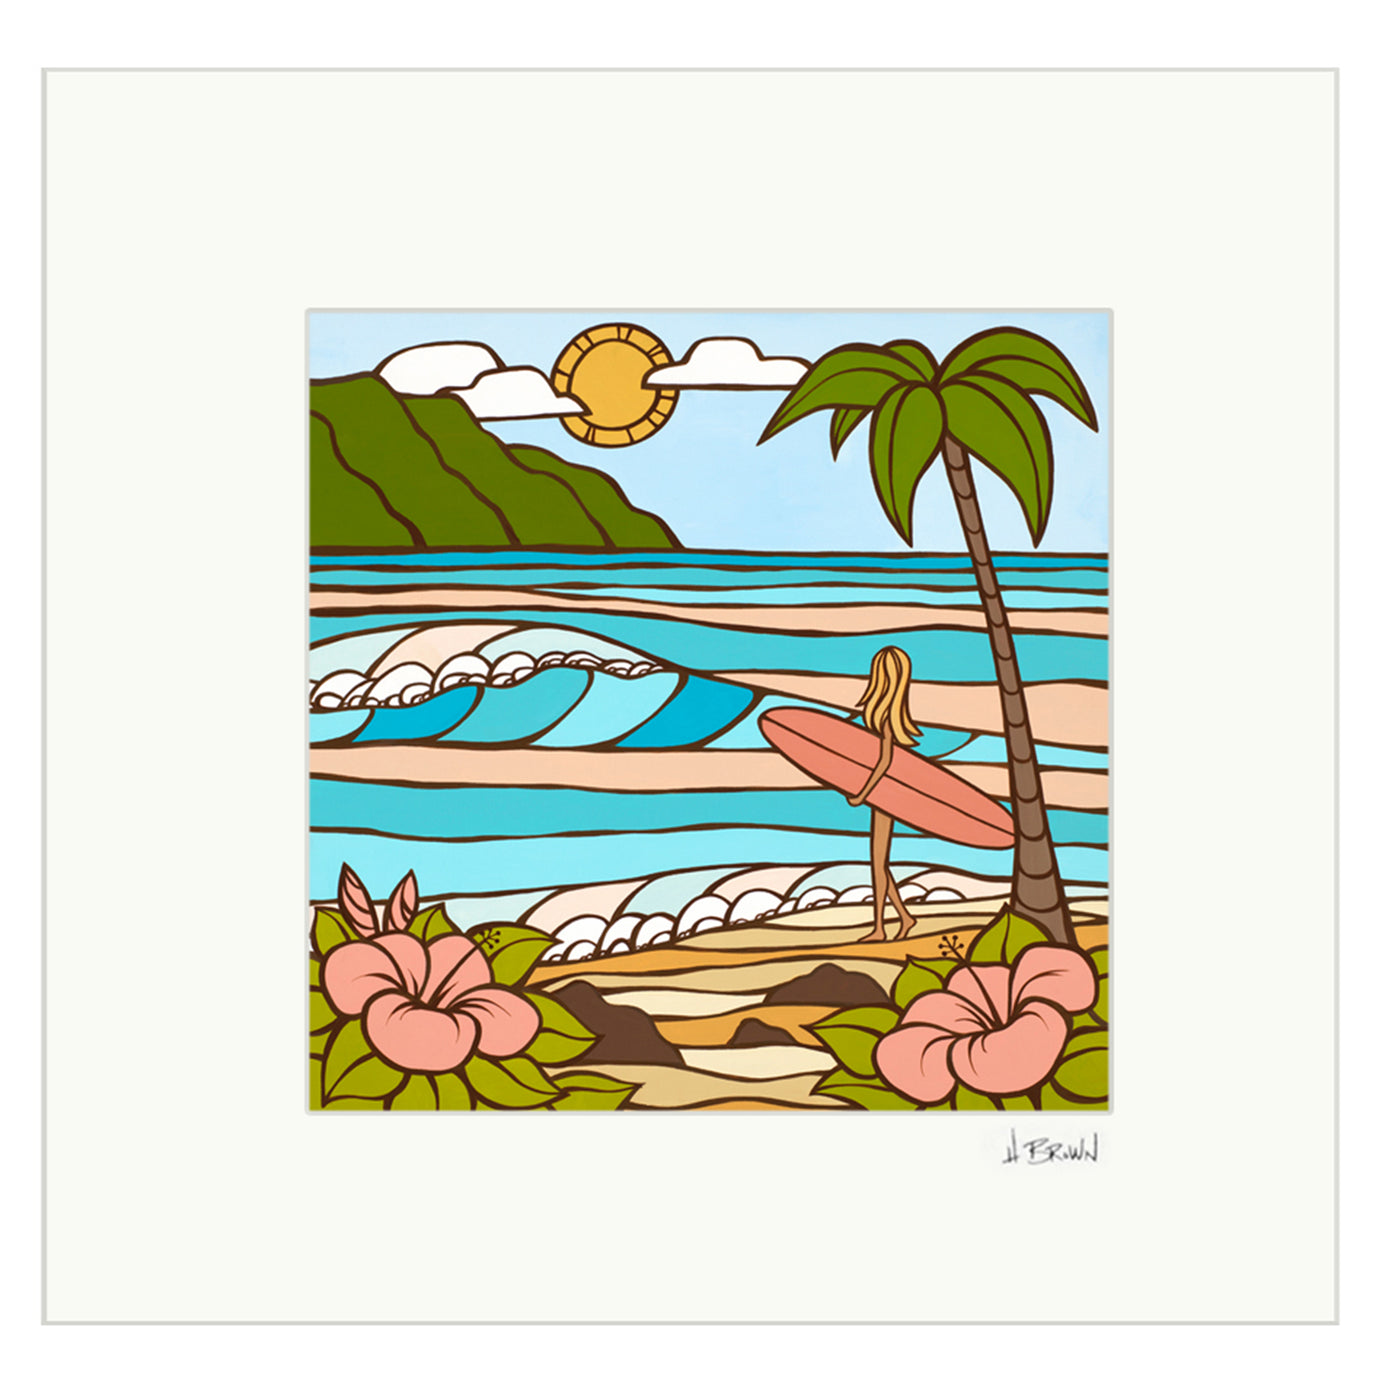 Matted print of Summer Morning no frame by Hawaii surf artist Heather Brown